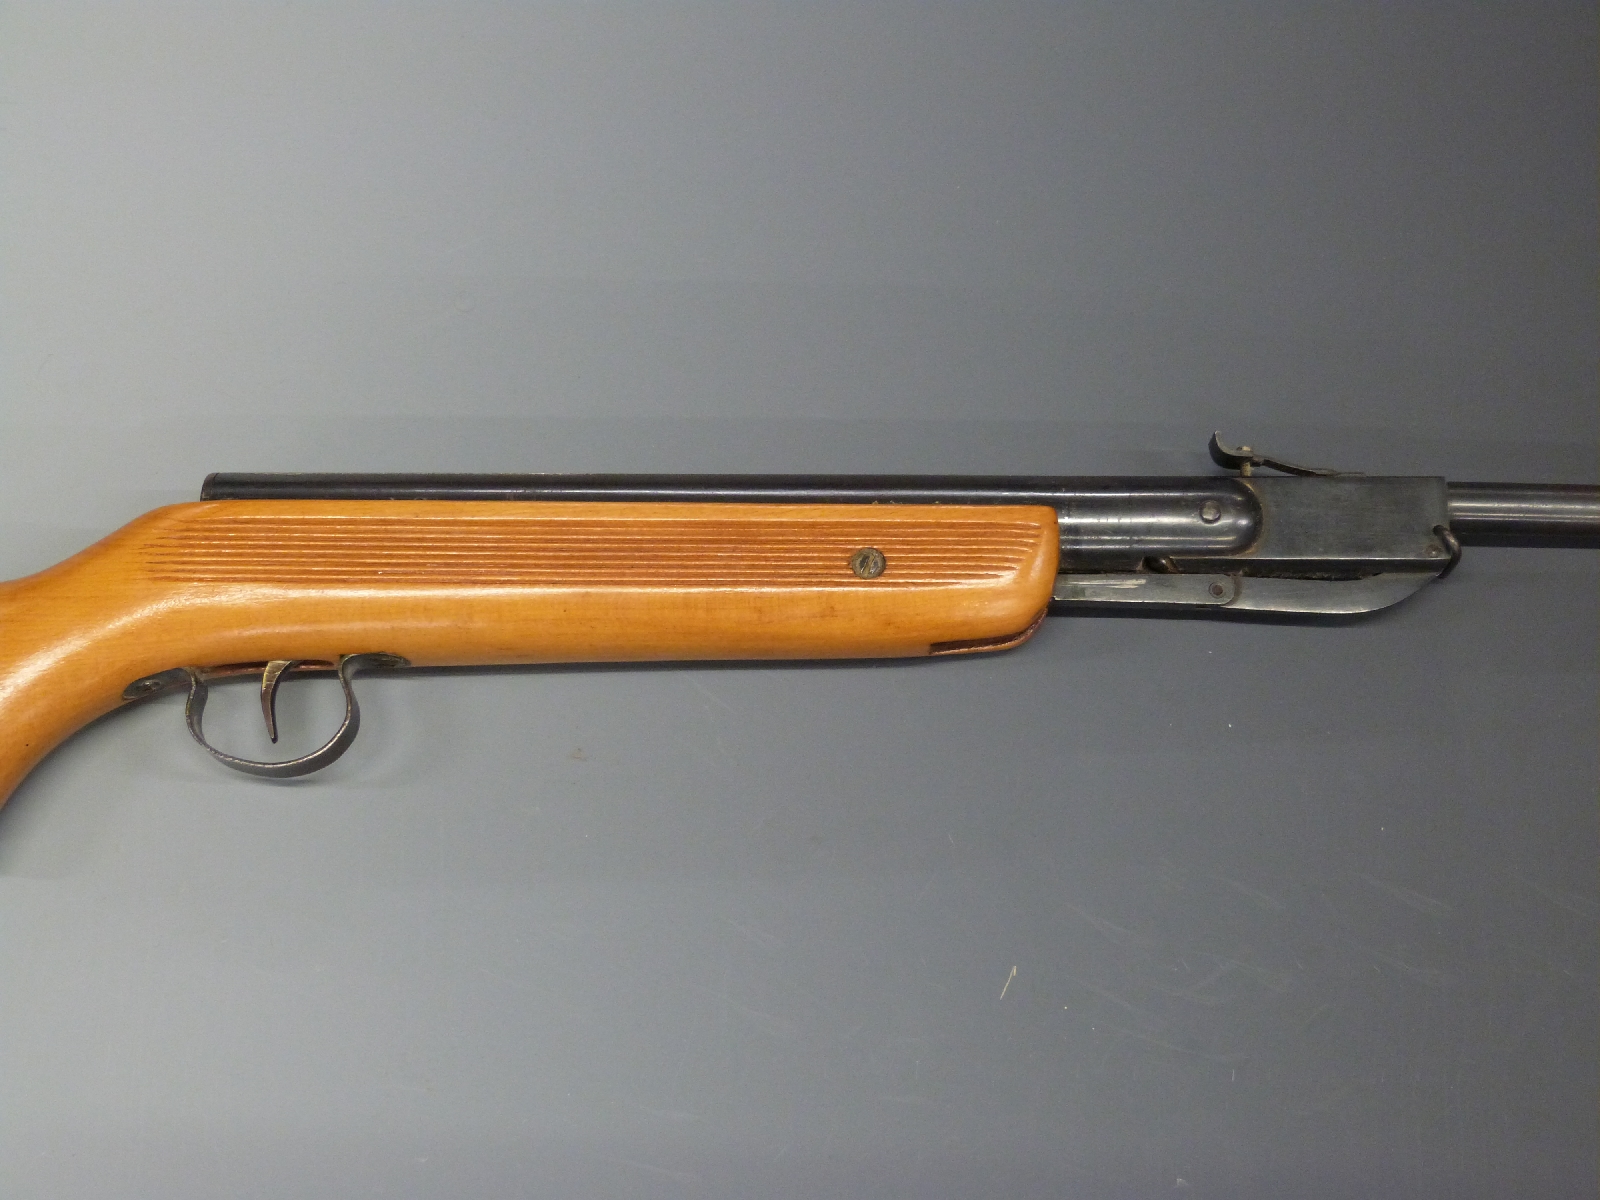 Relum Telly .22 air rifle with semi-pistol grip, raised cheek piece, sling suspension mounts and - Image 3 of 6